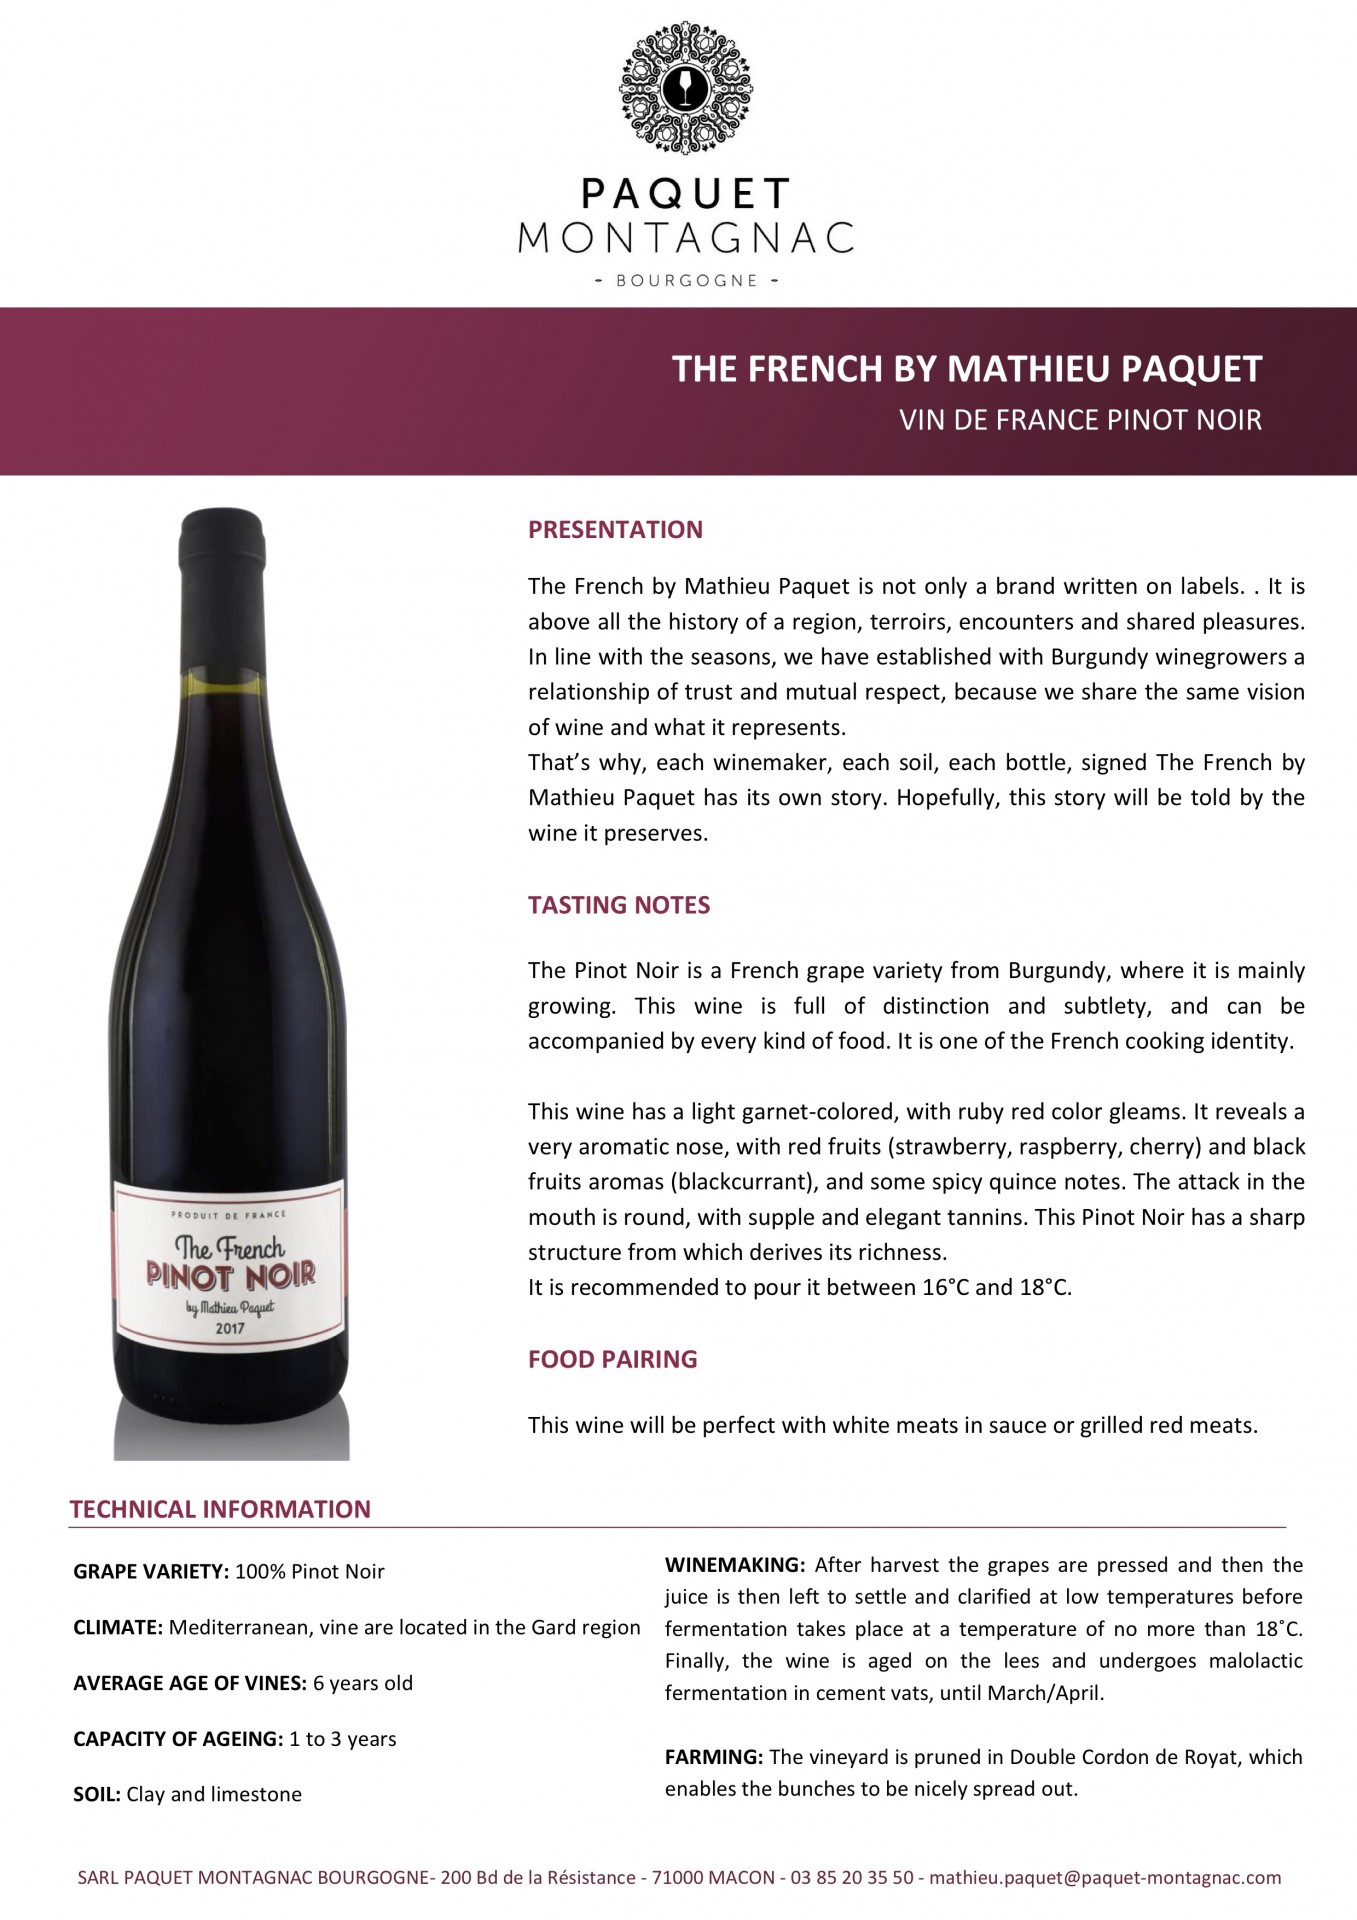 The French Pinot Noir